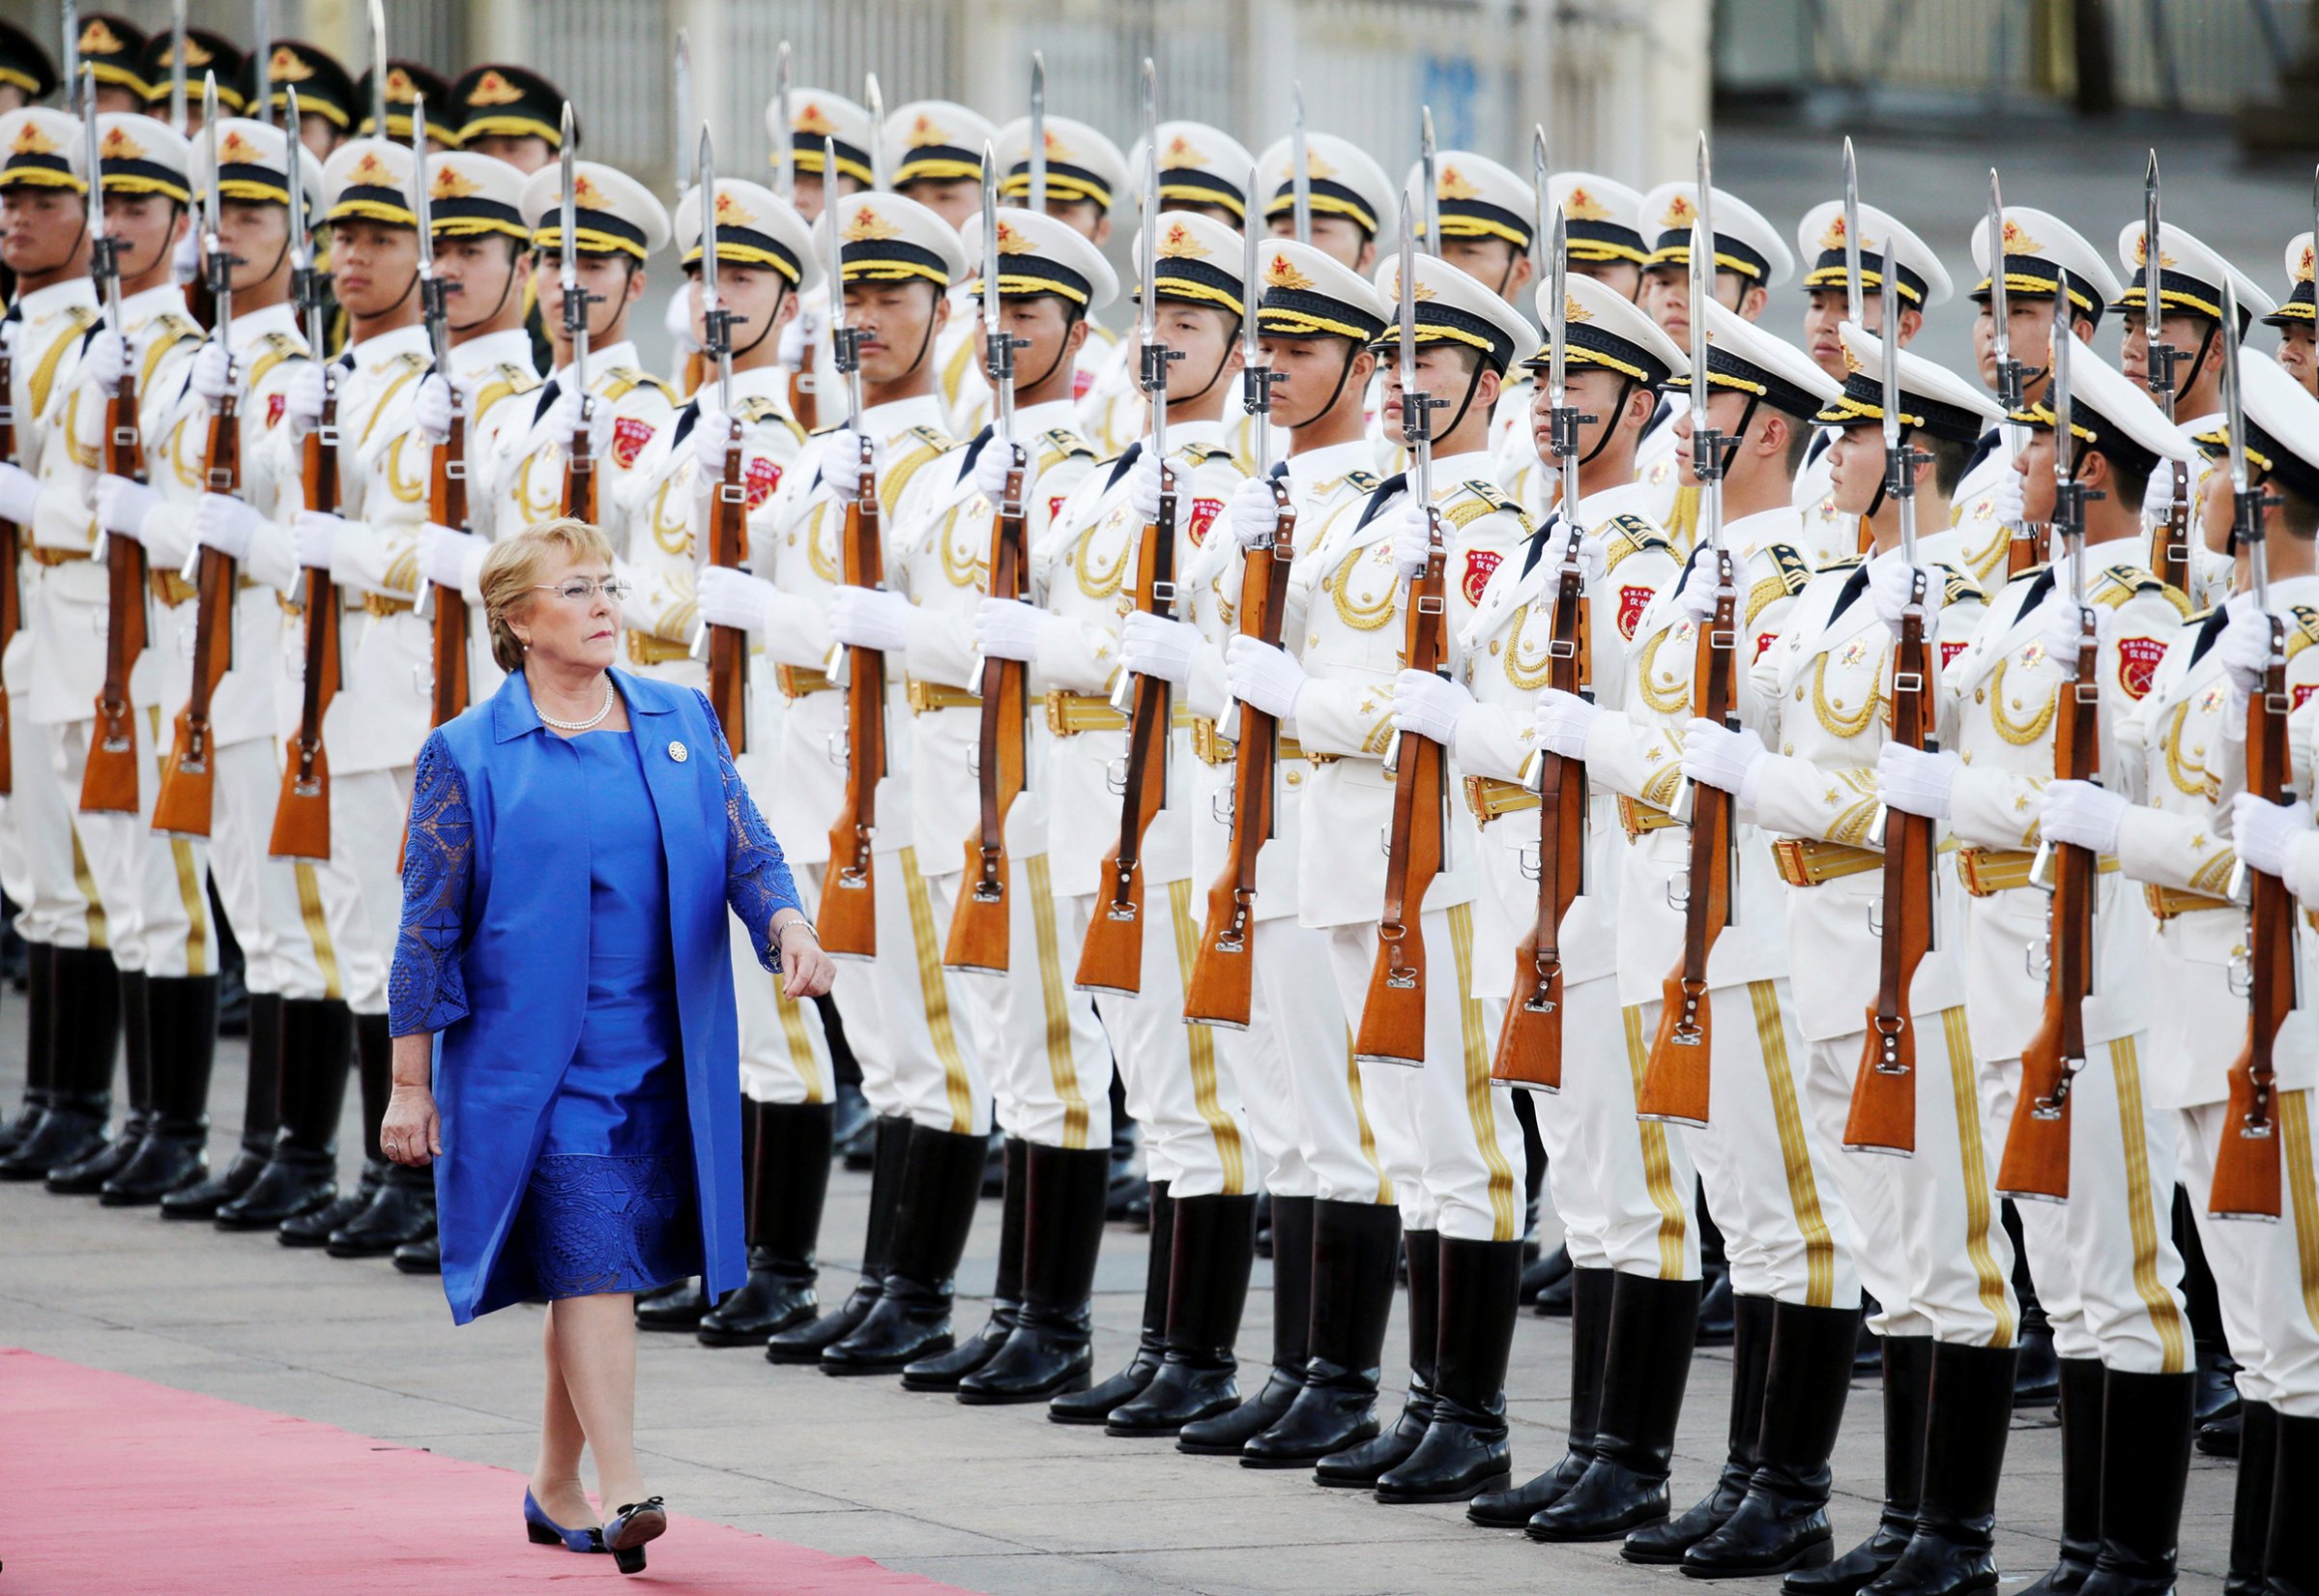 chile-president-her-country-fitful-progress-future-challenges